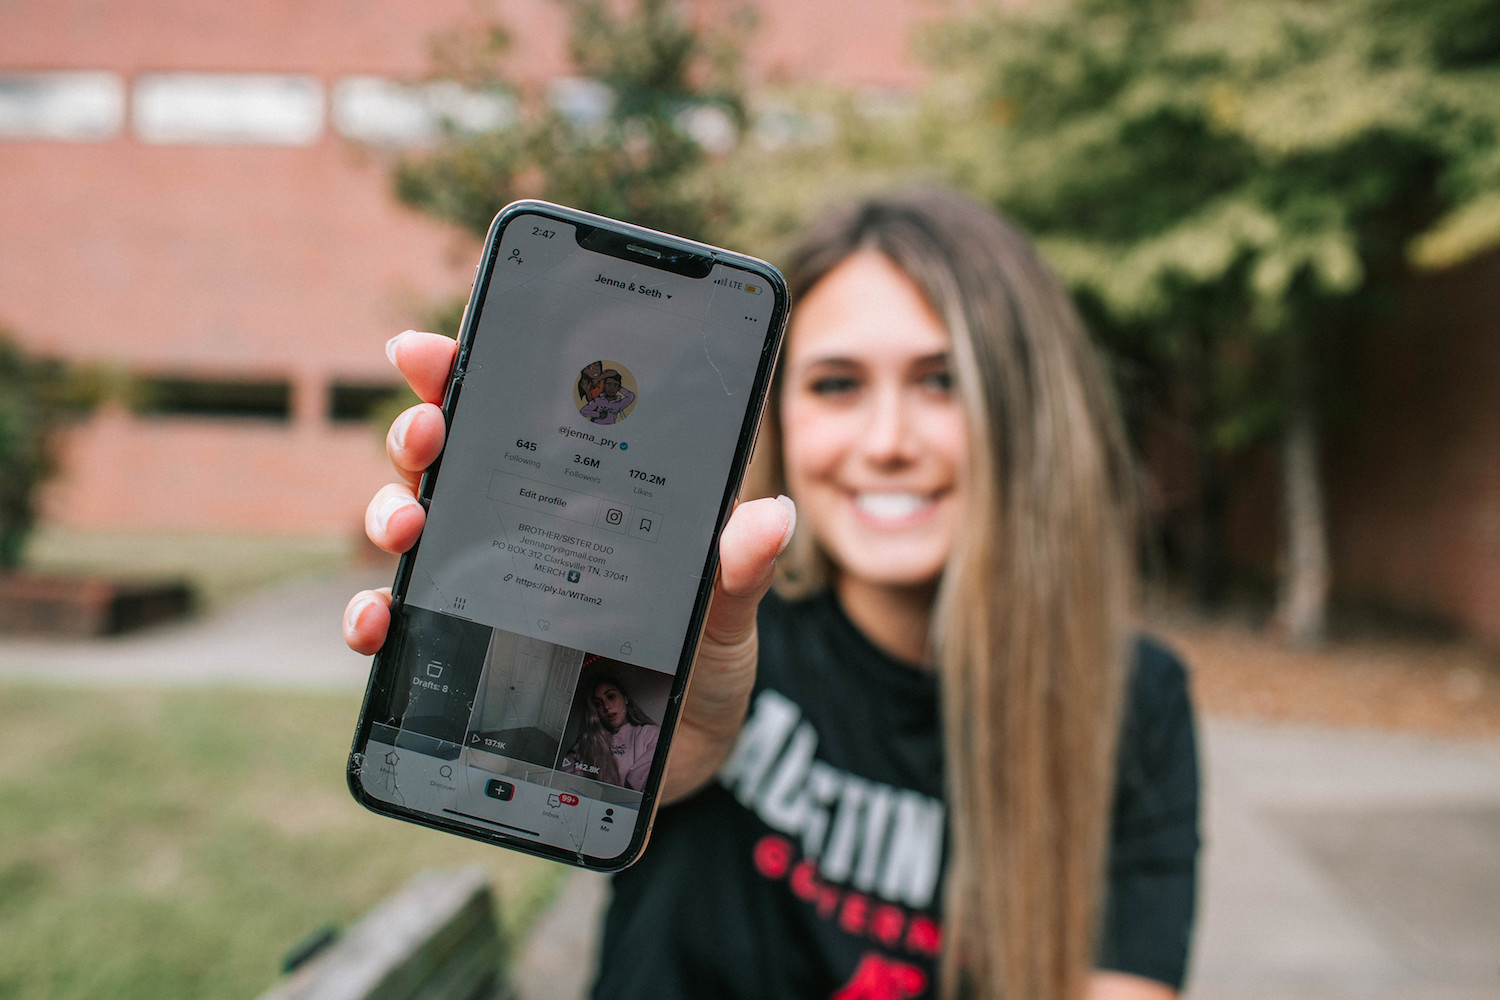 Austin Peay State University business marketing senior Jenna Pry and her brother, Seth, have become TikTok stars, attracting more than 3.7 million followers since a December 2019 video went viral.  In the eight-second video, Seth sprints through a rain-drenched parking lot in his Chick-fil-A uniform to Jenna’s car and asks, “Have you been served yet, ma’am? Can I get you anything?” That video has earned 3.6 million views so far.  From there, the brother and sister duo have carved out success from their videos, and some of their video’s costars – such as a literal throw pillow and a see-through chair – have helped propel them to stardom.  We caught up with Jenna, who expects to graduate in May, to ask how she and Seth have adapted to their fame, especially while navigating a pandemic.  How did the Chick-fil-A video happen?  I think it was the second week of last December, and it was our first video. I usually text Seth when he’s at Chick-fil-A and ask him to throw some extra nuggets in just to let him know I’m there. He was actually sitting in the parking lot waiting for his shift to start, and I texted that I was in the drive-thru and saw him. I’ve always recorded stuff and just leave it on. I have so many videos of him when he was younger. He’s always been so goofy. And I just happened to flip on my camera, and he was running, and it blew up. That was not planned. It just happened so fast.  How quickly after the video went viral did you figure out you could just keep making popular videos?  After that Chick-fil-A video we really didn’t know how to style videos people liked because it was just such a spontaneous video. I didn’t know how to keep rolling with this. The next few videos kind of didn’t do so well because we didn't really know what we were doing. Then I don’t know, I guess people just fell in love with Seth’s character, and we just kept going with it.  How do you come up with the ideas for your videos?  Some of our ideas are planned but most of the time, I just tell Seth to walk through the door and say something dumb because he’s really good at that. But, yeah, our scripts are very spontaneous. We just go with it. We don’t script much.  But you do stick to some themes?  Yes. We do stick to opening the door and throwing the pillow. Seth pretty much just says whatever. We have the same routine.  Even though you’re mostly behind the camera in your videos, your laughing in response to your brother is part of the magic of the video.  Yeah, people say my laugh is contagious and that they like to laugh along with me.  What was your life like during the next several months?  Me and Seth both have jobs, and it was kind of hard to fit our time in with all that craziness going on. Making videos was extremely hard from December to March. Then in March, me and Seth both got relieved from our jobs, and that’s when we started making lots of videos and hit 2 million followers. We were just doing nothing but making videos. When we both got back into our jobs, things started slowing down again, but I recently quit my job. Sometimes we struggle here and there, like he wants to go and do his thing and I go and do my thing. He’ll come home at midnight, and I’ll say, “All right, let’s do video real quick.”  Did your videos change when the pandemic started?  Not too much. Our views went up a whole lot. The pandemic got everyone on their phones. We saw a huge increase in our engagement  Tell me a little bit more about yourself outside the videos.  I’m a military brat originally from Georgia. I came to Austin Peay because my family is local, and I wanted to stay with my family. I wanted to go to a bigger school, but I’m glad I go here because it’s smaller, I’m with my friends, and the classes have 20 people, so I’m able to connect with my professor. Seth is studying to be a pilot. He gets his license at the end of this month. He wants to get his license then go fly commercial. He’s wanted to do that since he was young.  To see more  You can see more of Jenna and Seth’s videos on their social media accounts:  • TikTok: @jenna_pry. • Instagram: @seth.pry. • YouTube: Jenna and Seth Pry.  This interview was edited for length and clarity.